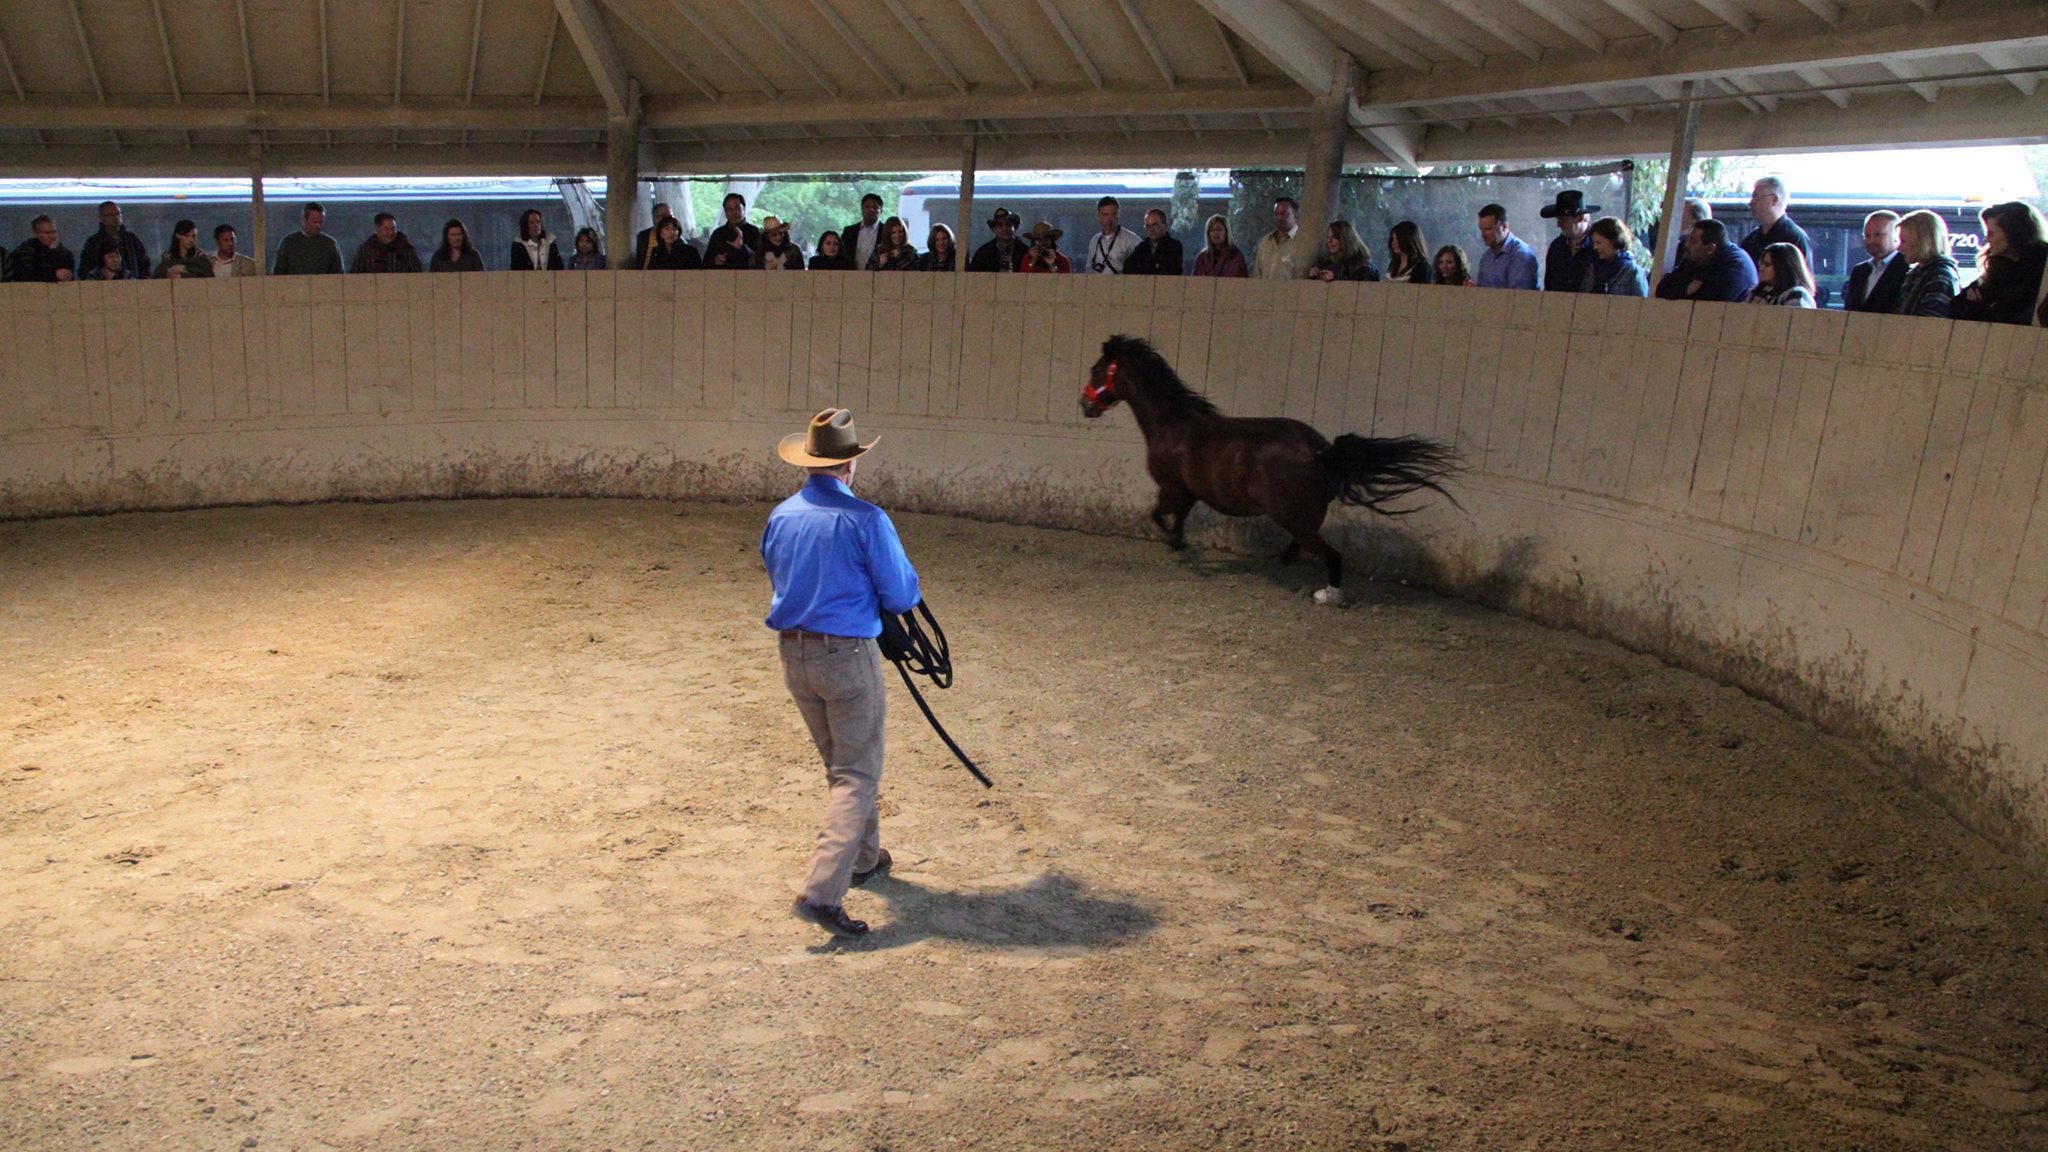 People invited to learn from horses at event in May